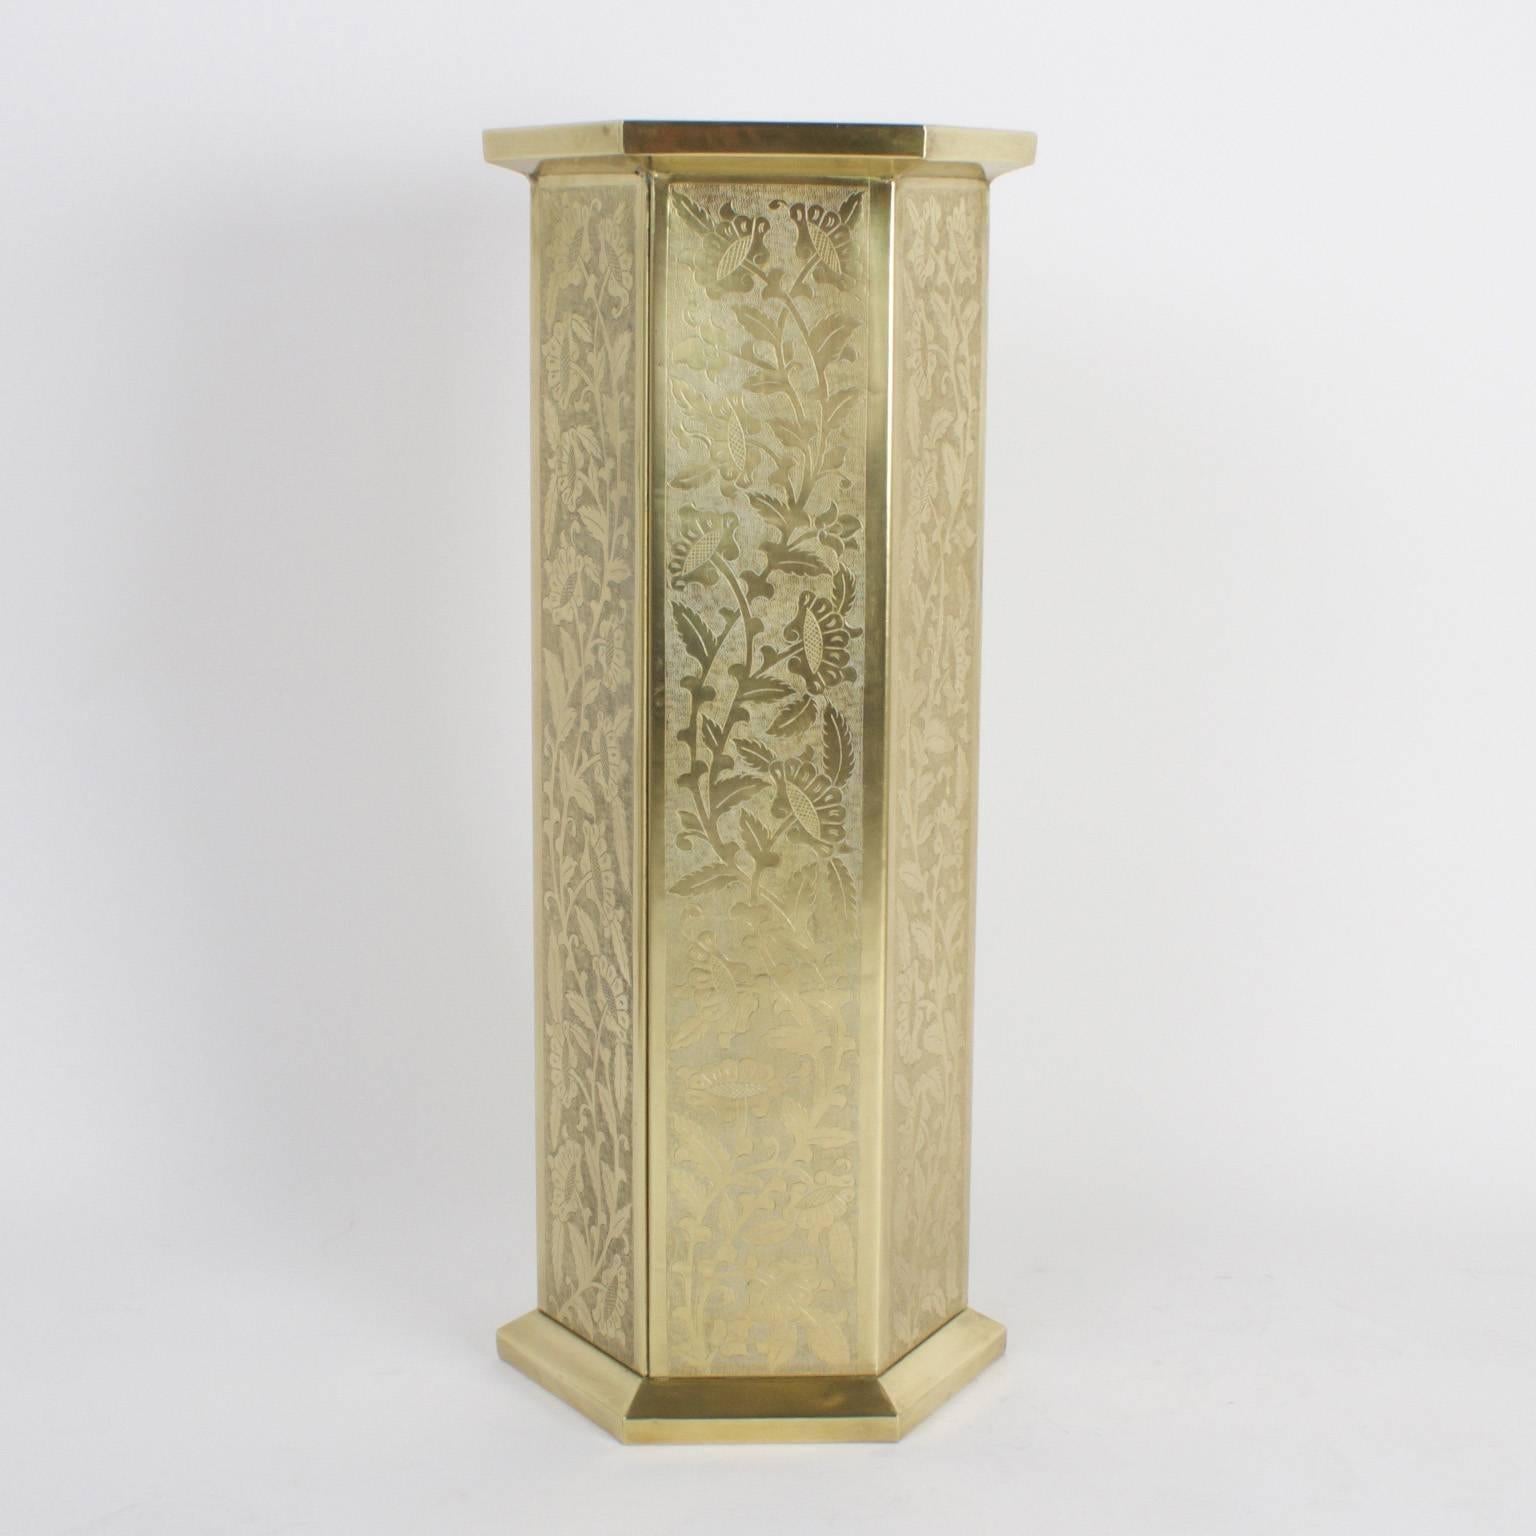 Spirited pair of brass pedestals or stands with lively hand-hammered floral patterns on all six panels. Hand polished and lacquered for easy care.
  